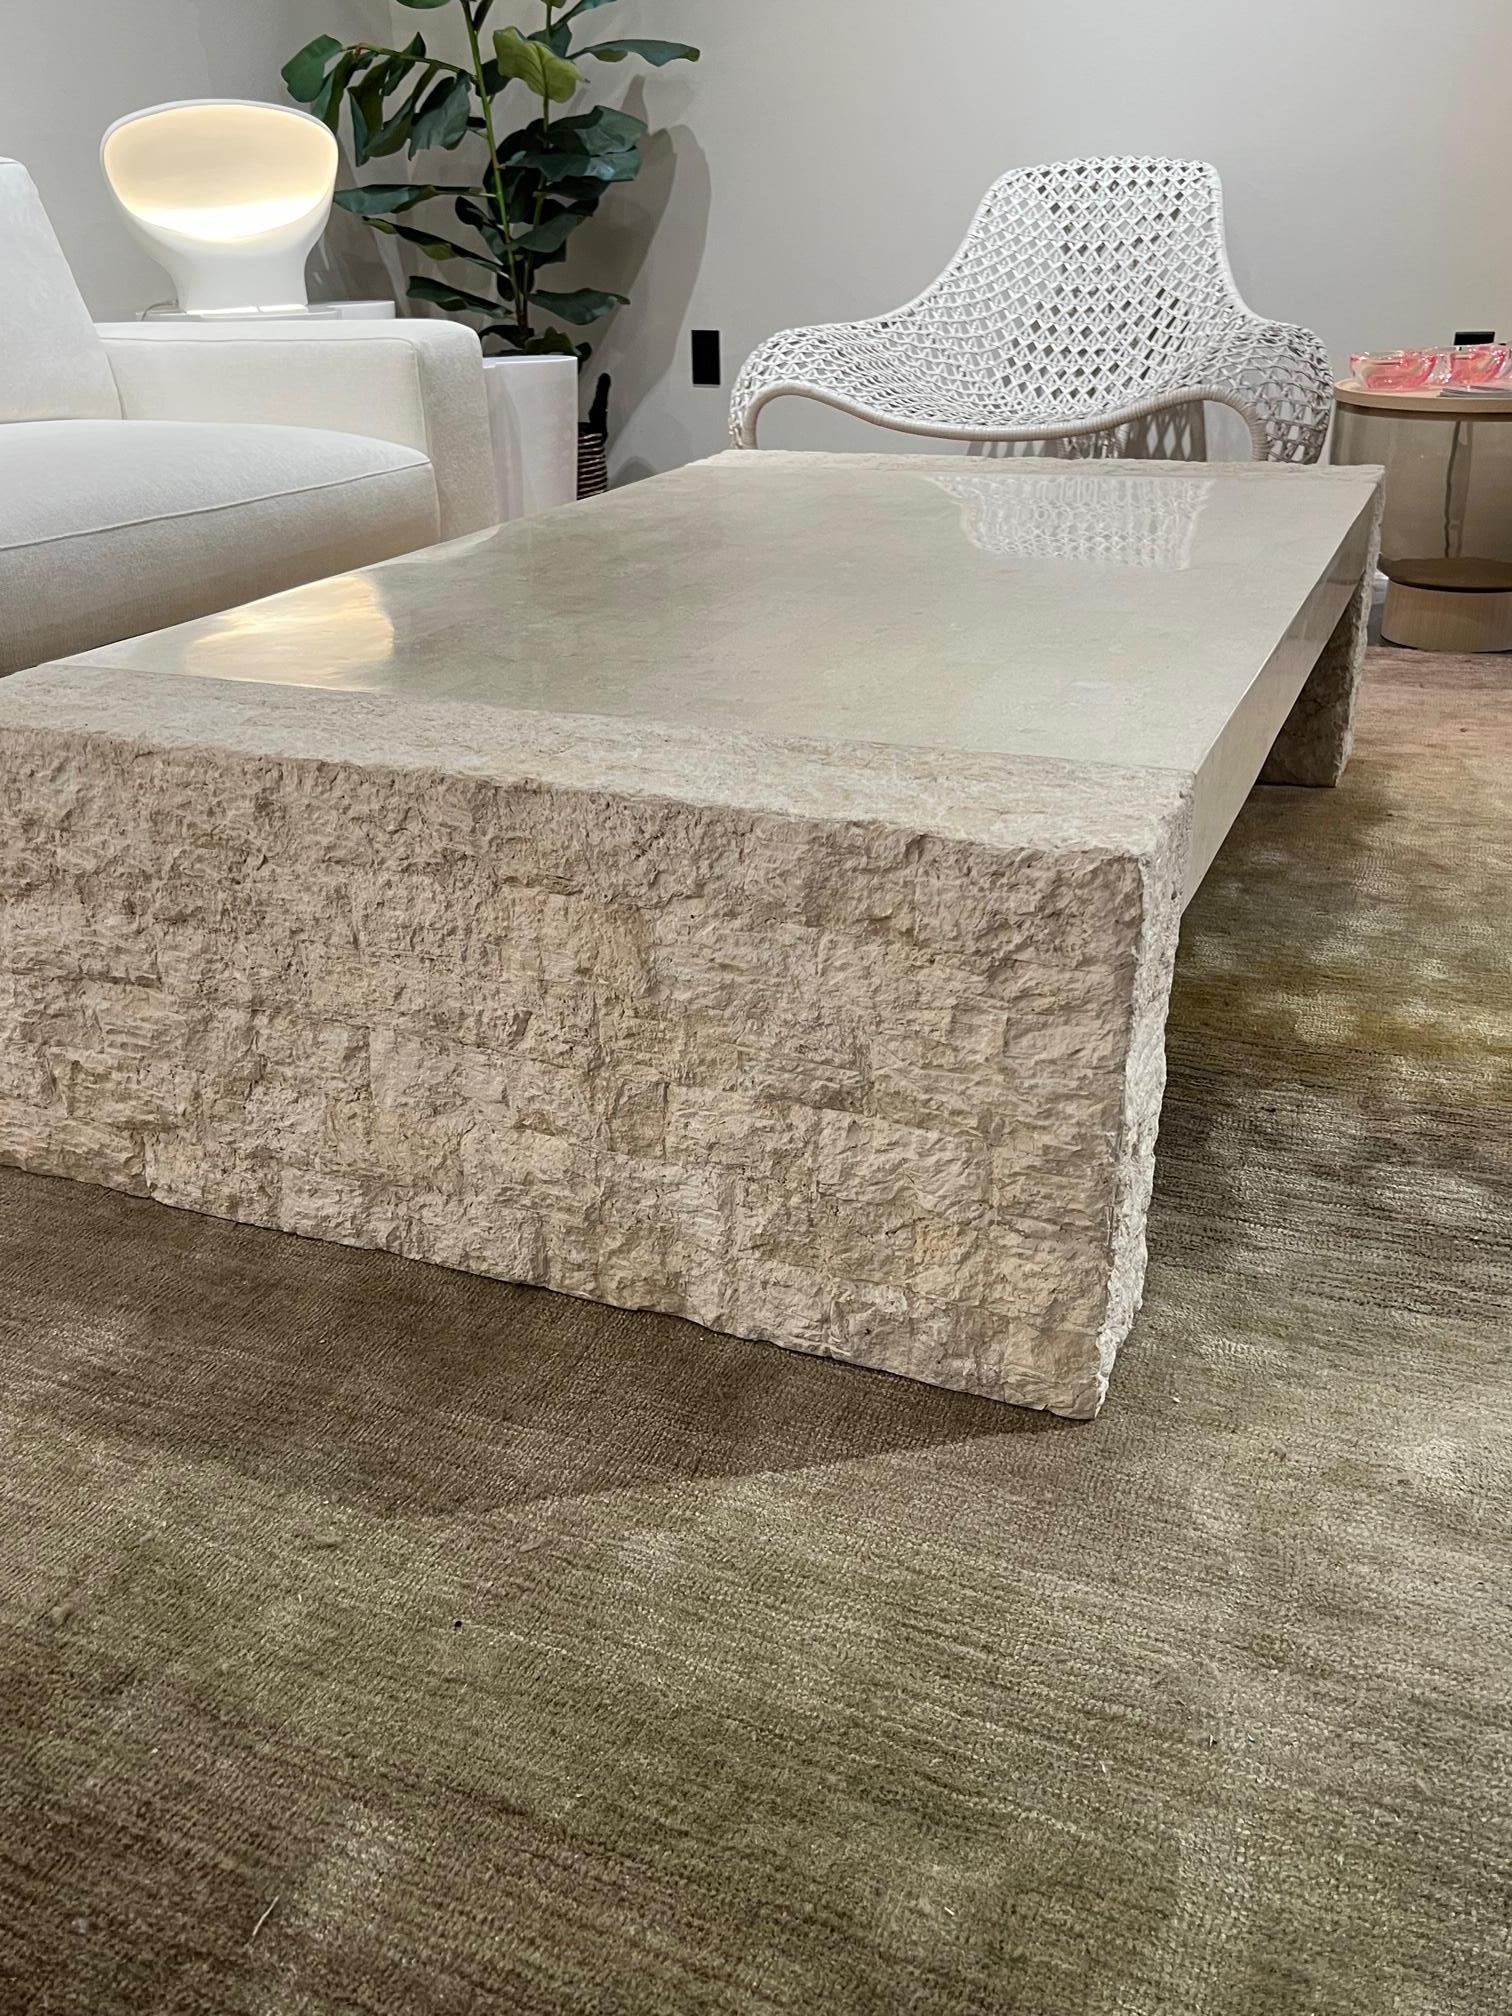 Baroque Tessellated Stone Table For Sale